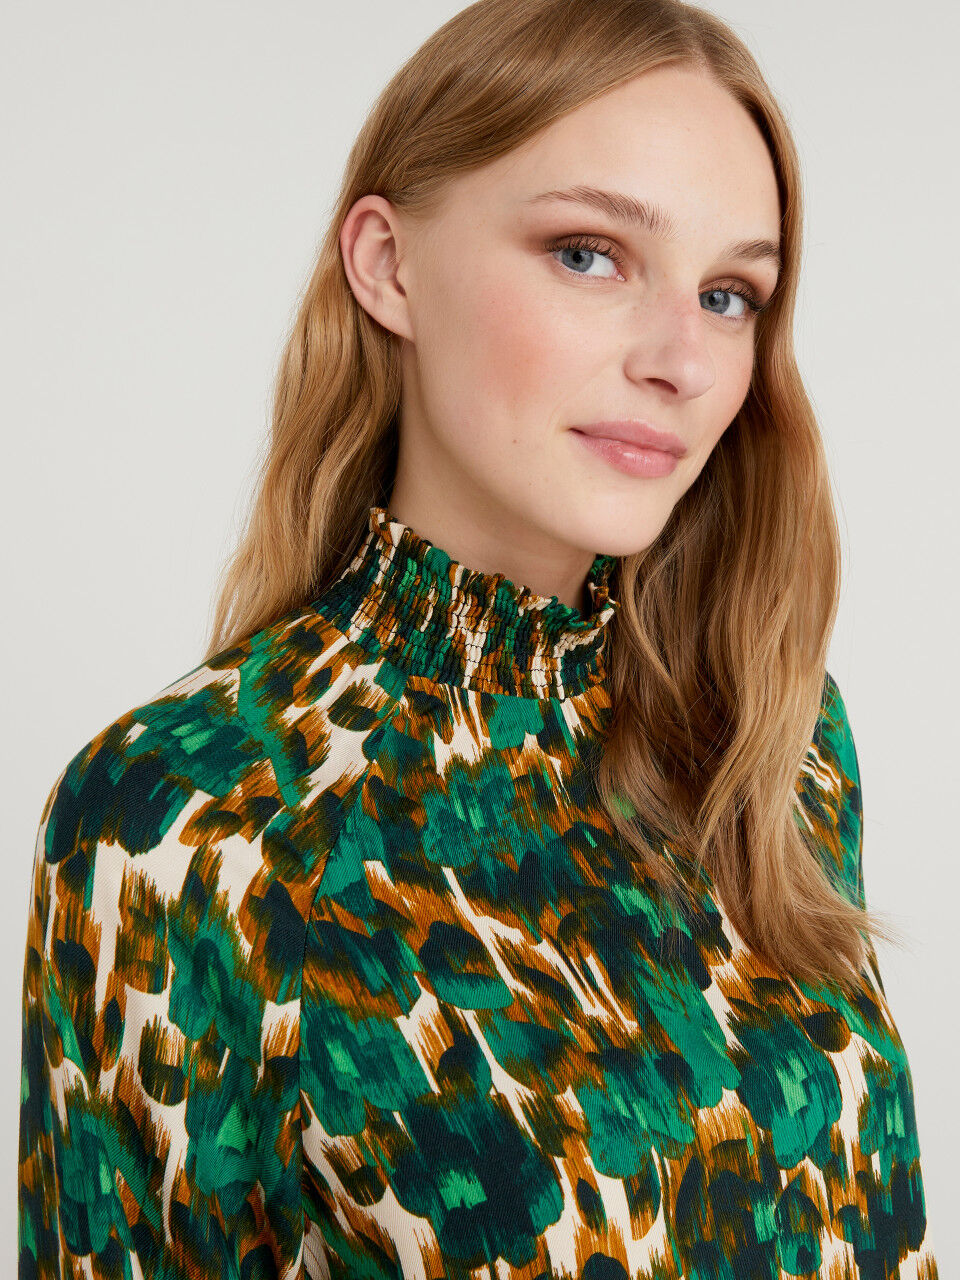 Patterned blouse with high collar